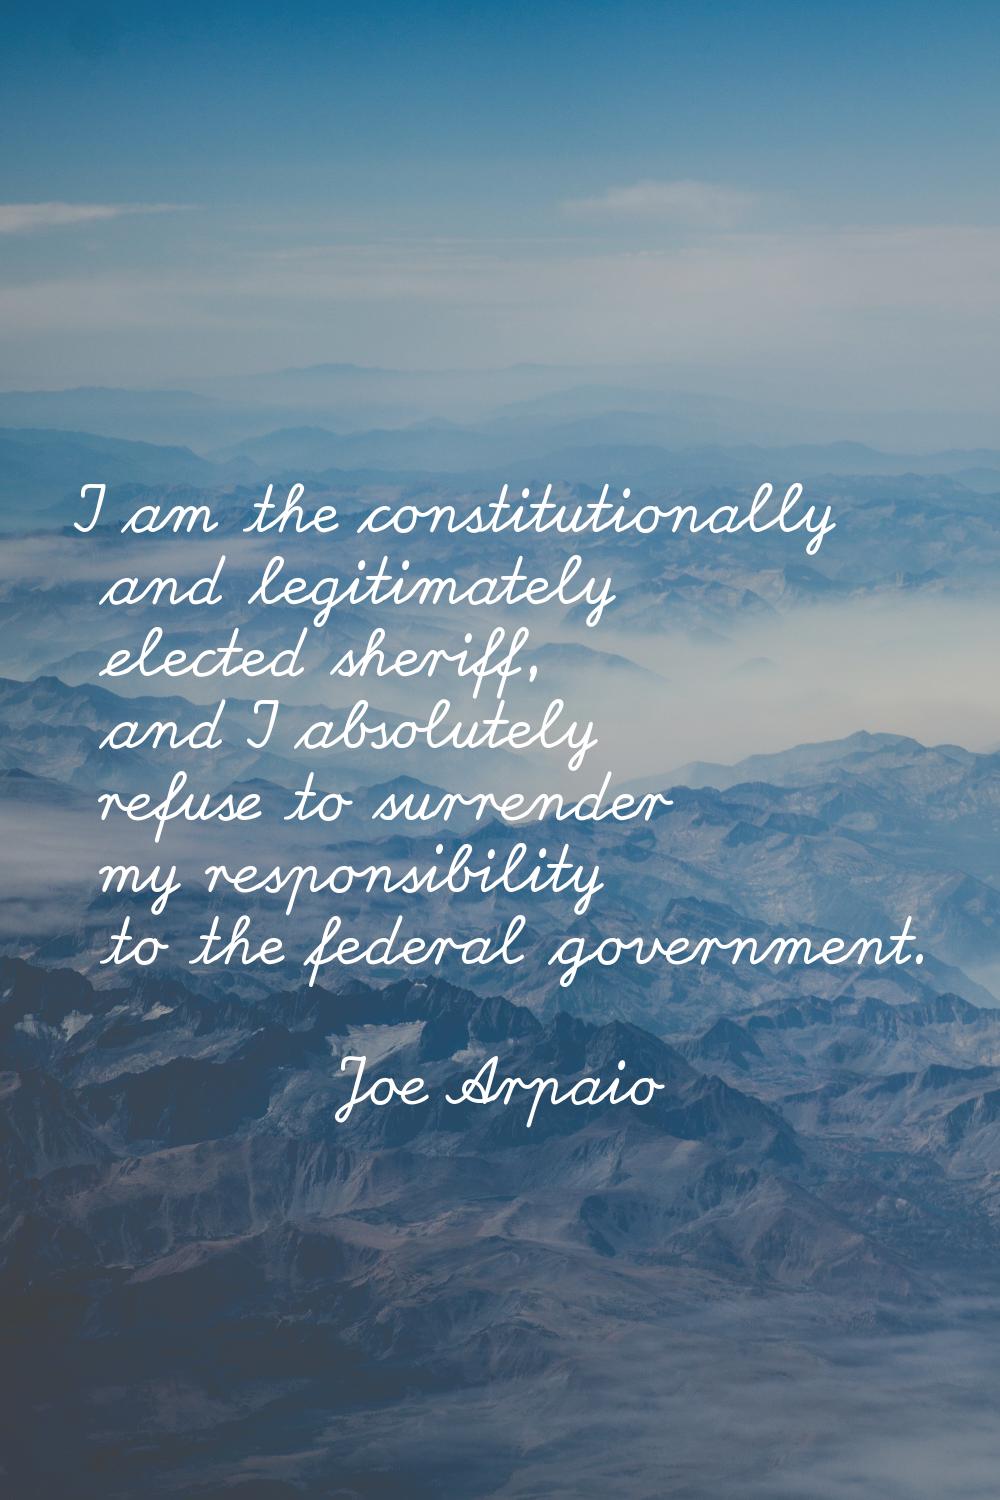 I am the constitutionally and legitimately elected sheriff, and I absolutely refuse to surrender my